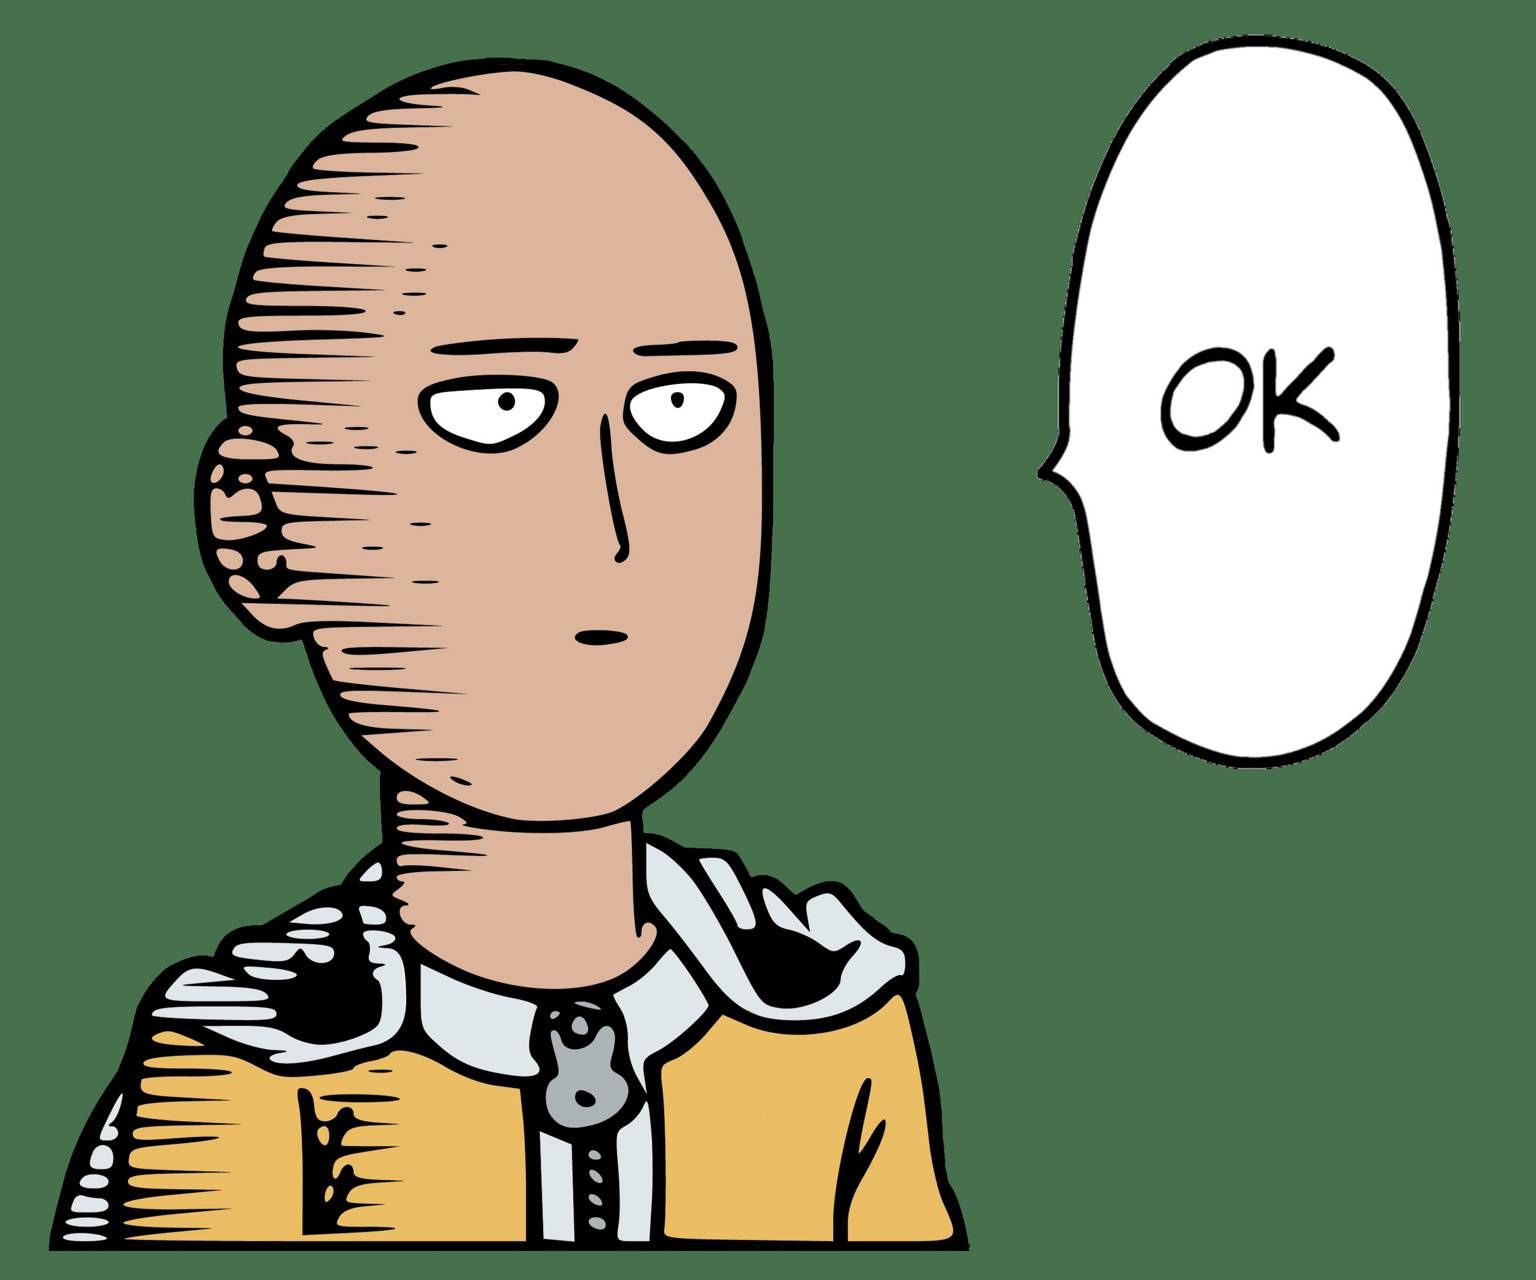 one punch man ok wallpapers by chavda123 